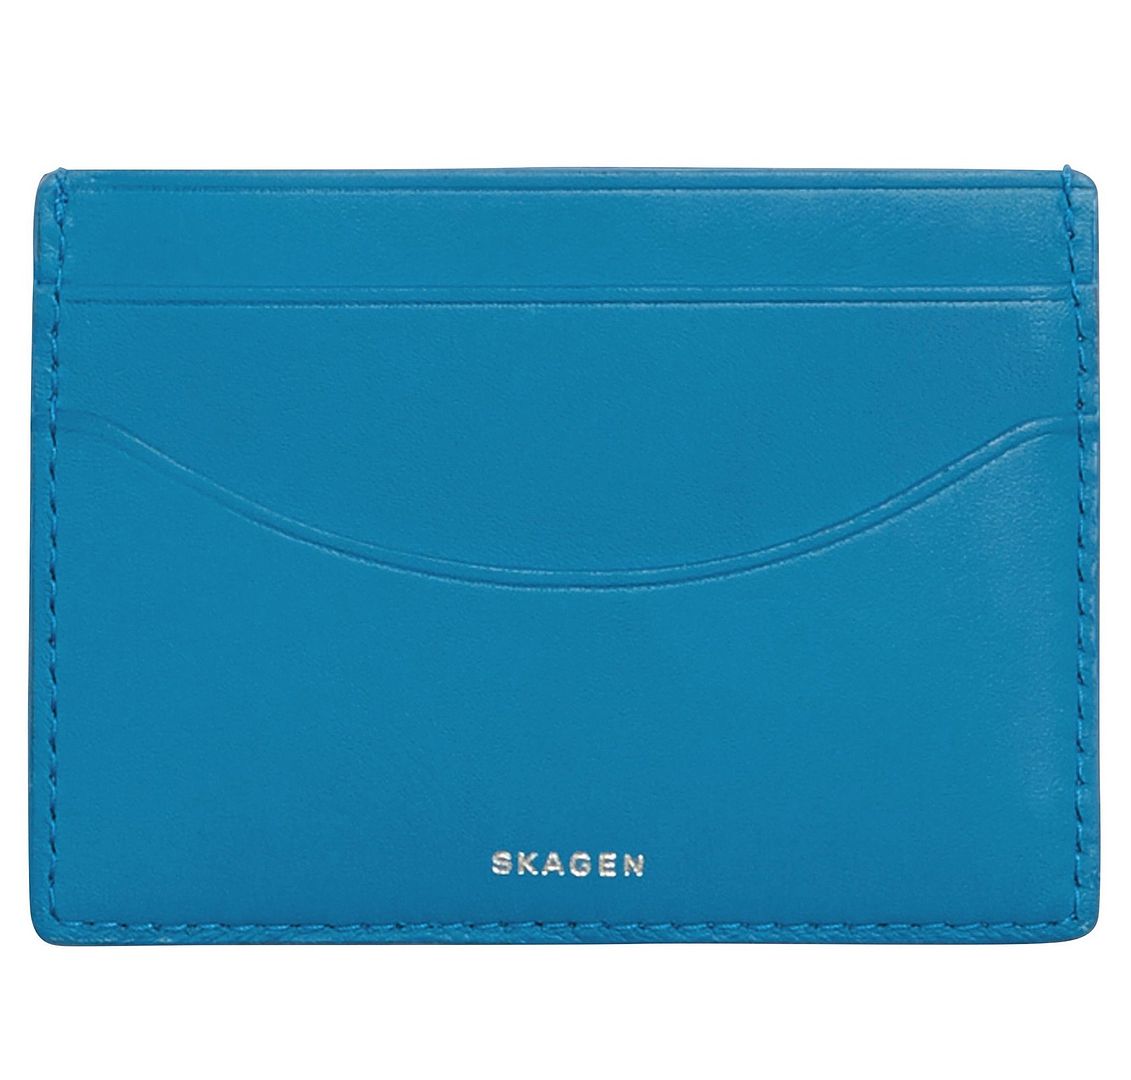 Gifts for the cool dad: Skagen leather card case